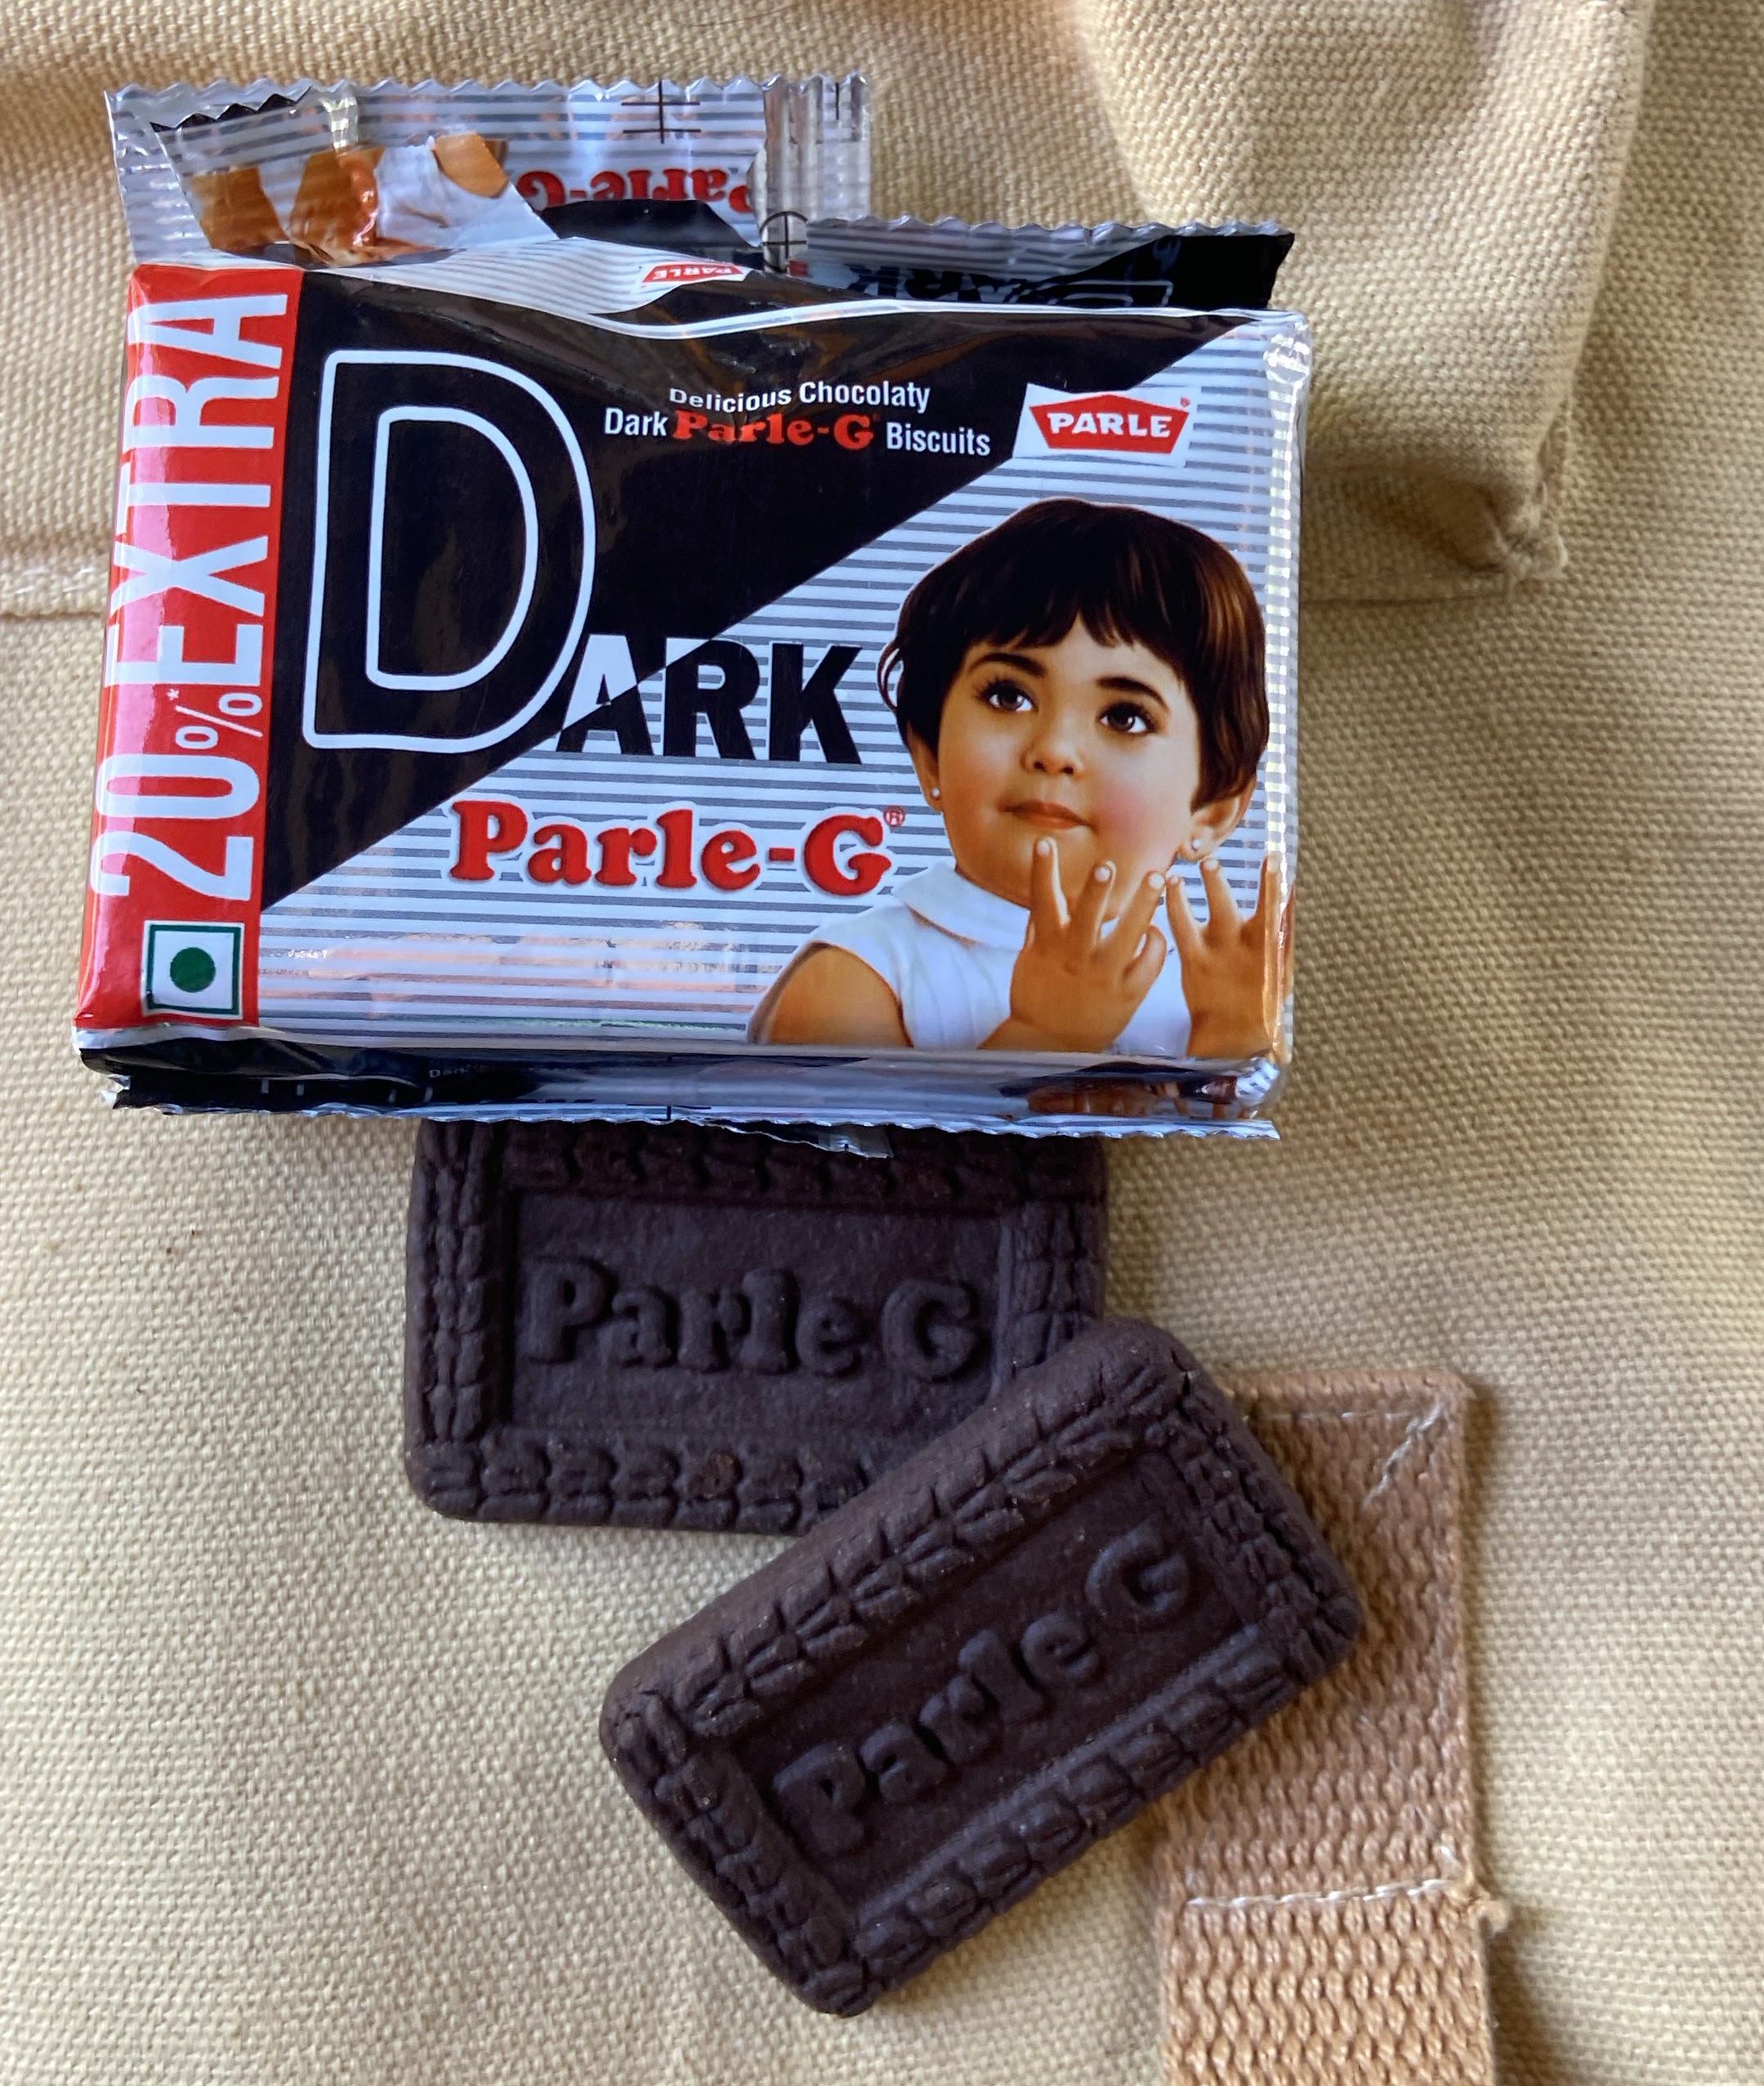 Dark Parle-G Enigma: Chocolate Illusion or Reality? - Vakilsearch | Blog